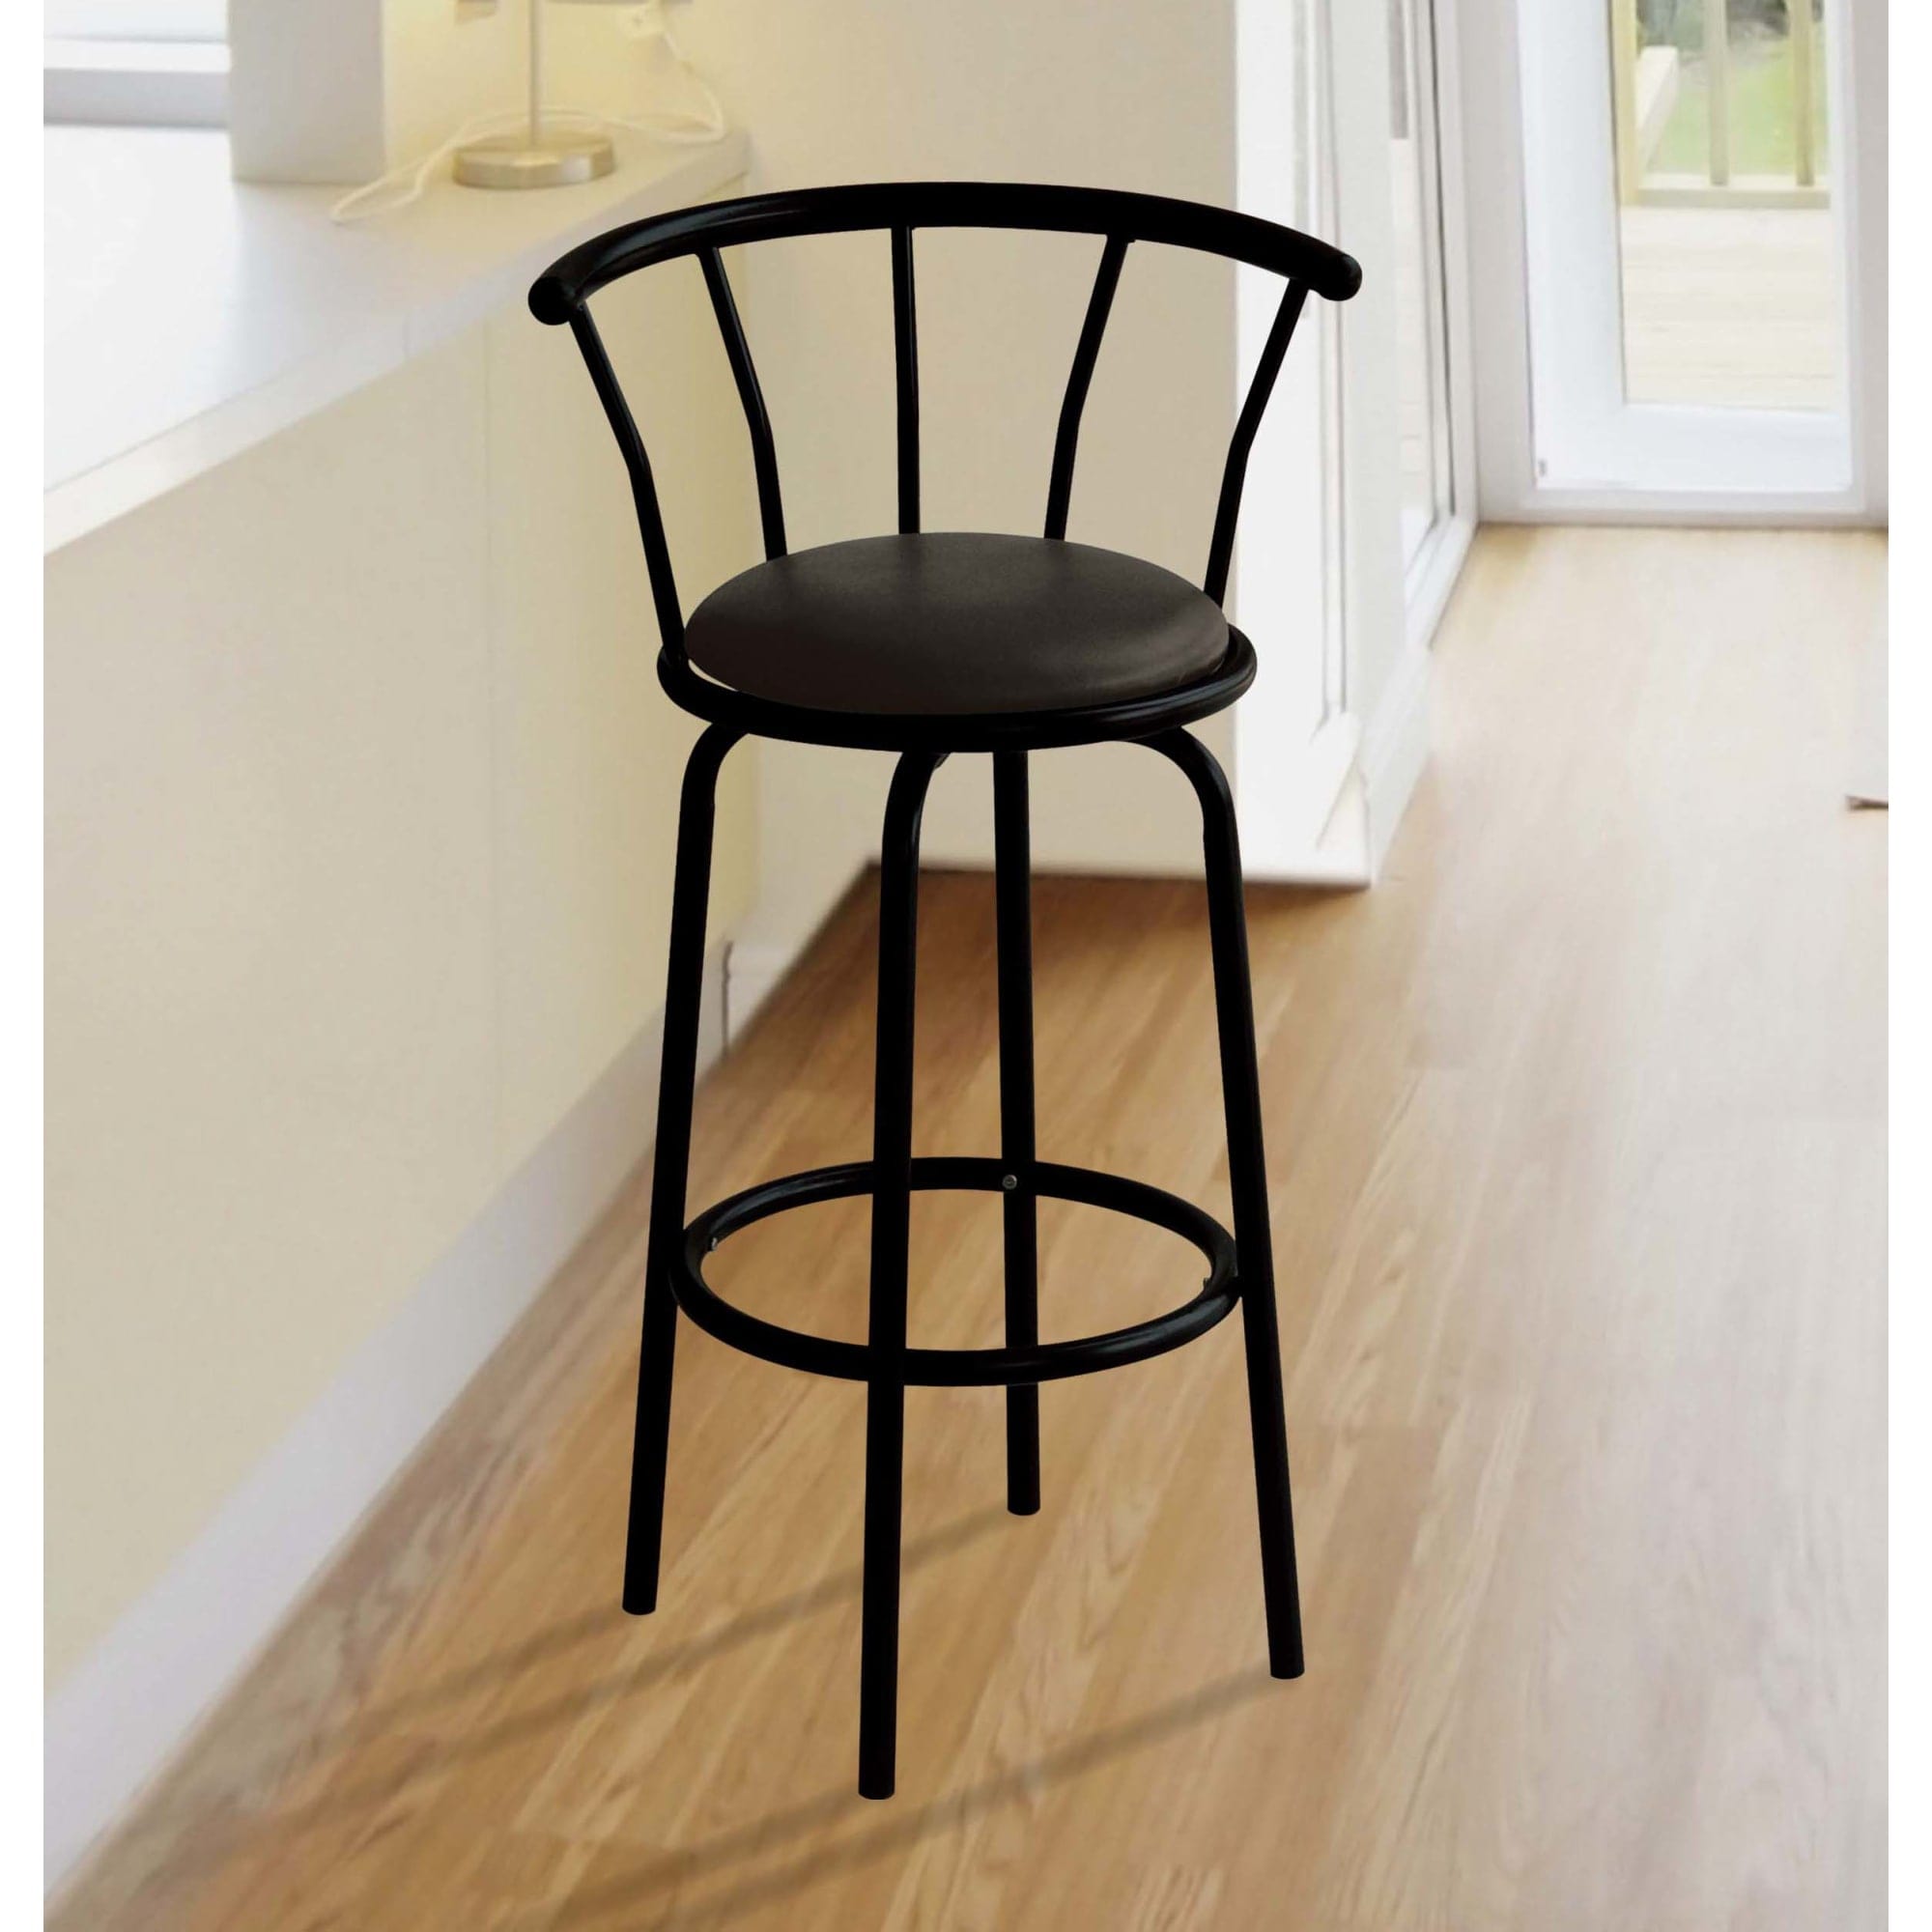 Home Basics Curved Swivel Top Bar Stool with Cushioned Seat, Black $30.00 EACH, CASE PACK OF 2